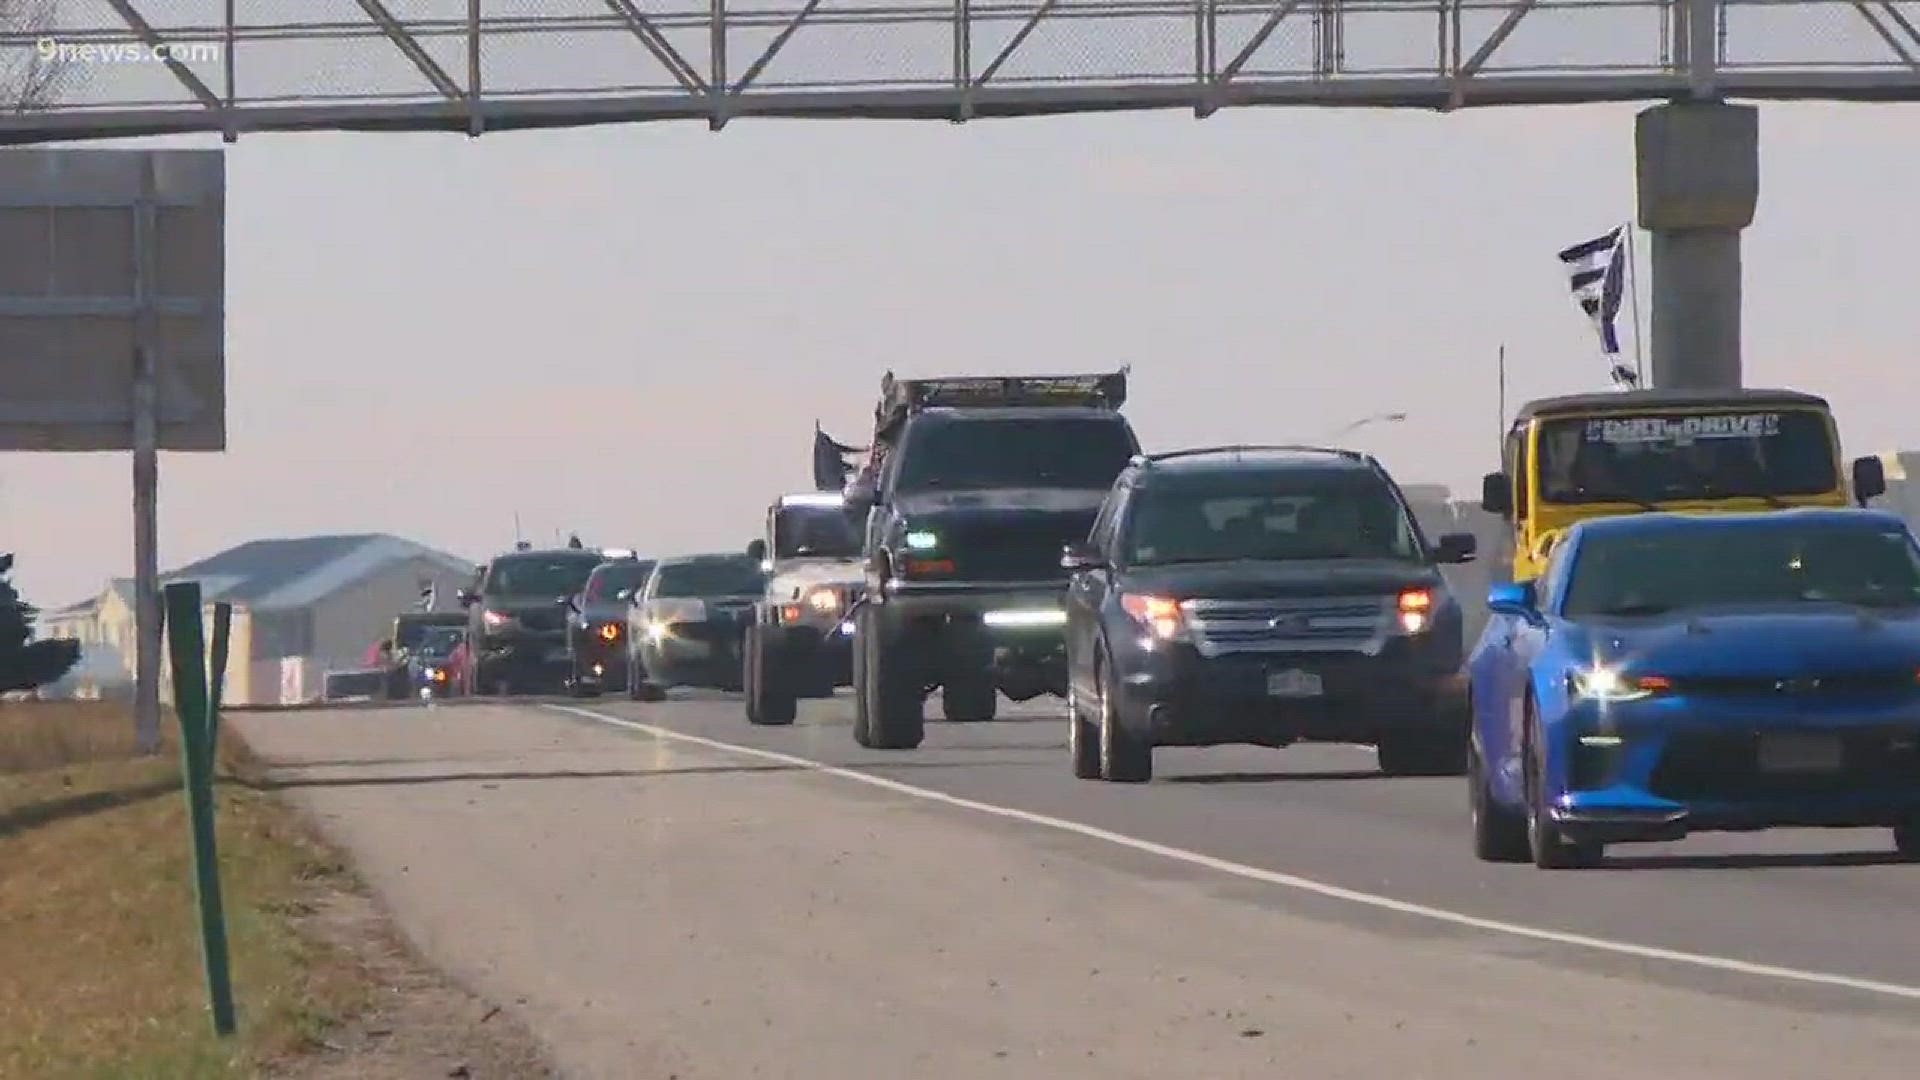 If you were driving on I-76 or US 85 Sunday morning, you may have seen their "thin blue line" flags and bumper stickers. A caravan of 4x4 vehicles and semi trucks drove from Arvada to the Colorado State Patrol office in Greeley to honor Cpl. Daniel Groves. Groves was killed during the blizzard on March 13. On Sunday, a group called 4Lo4LEO organized the drive to Greeley.